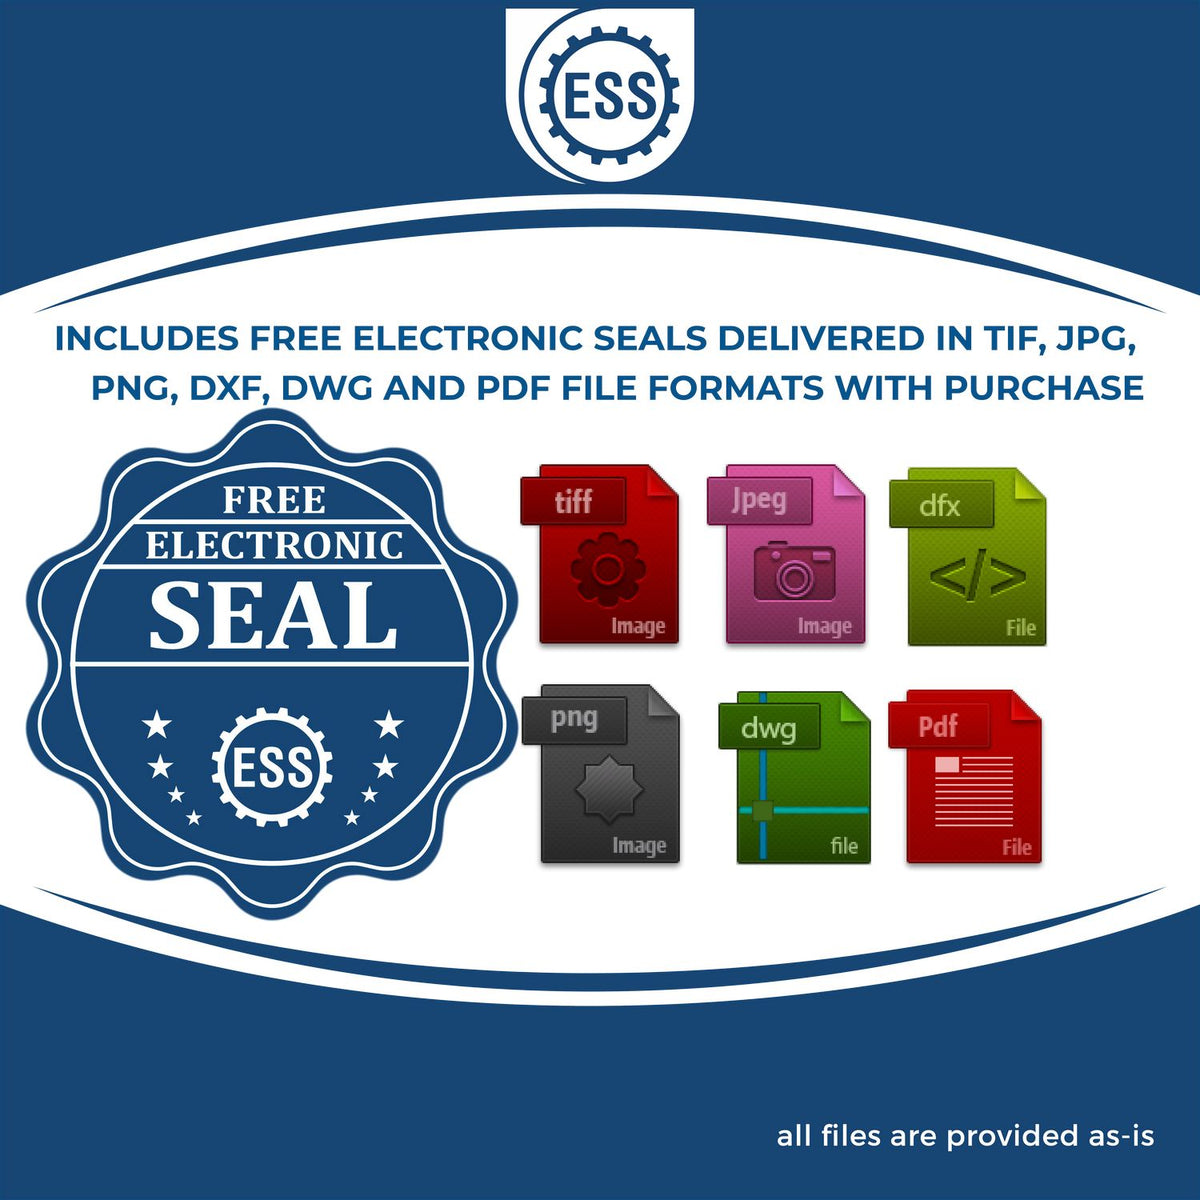 An infographic for the free electronic seal for the Self-Inking Massachusetts Landscape Architect Stamp illustrating the different file type icons such as DXF, DWG, TIF, JPG and PNG.